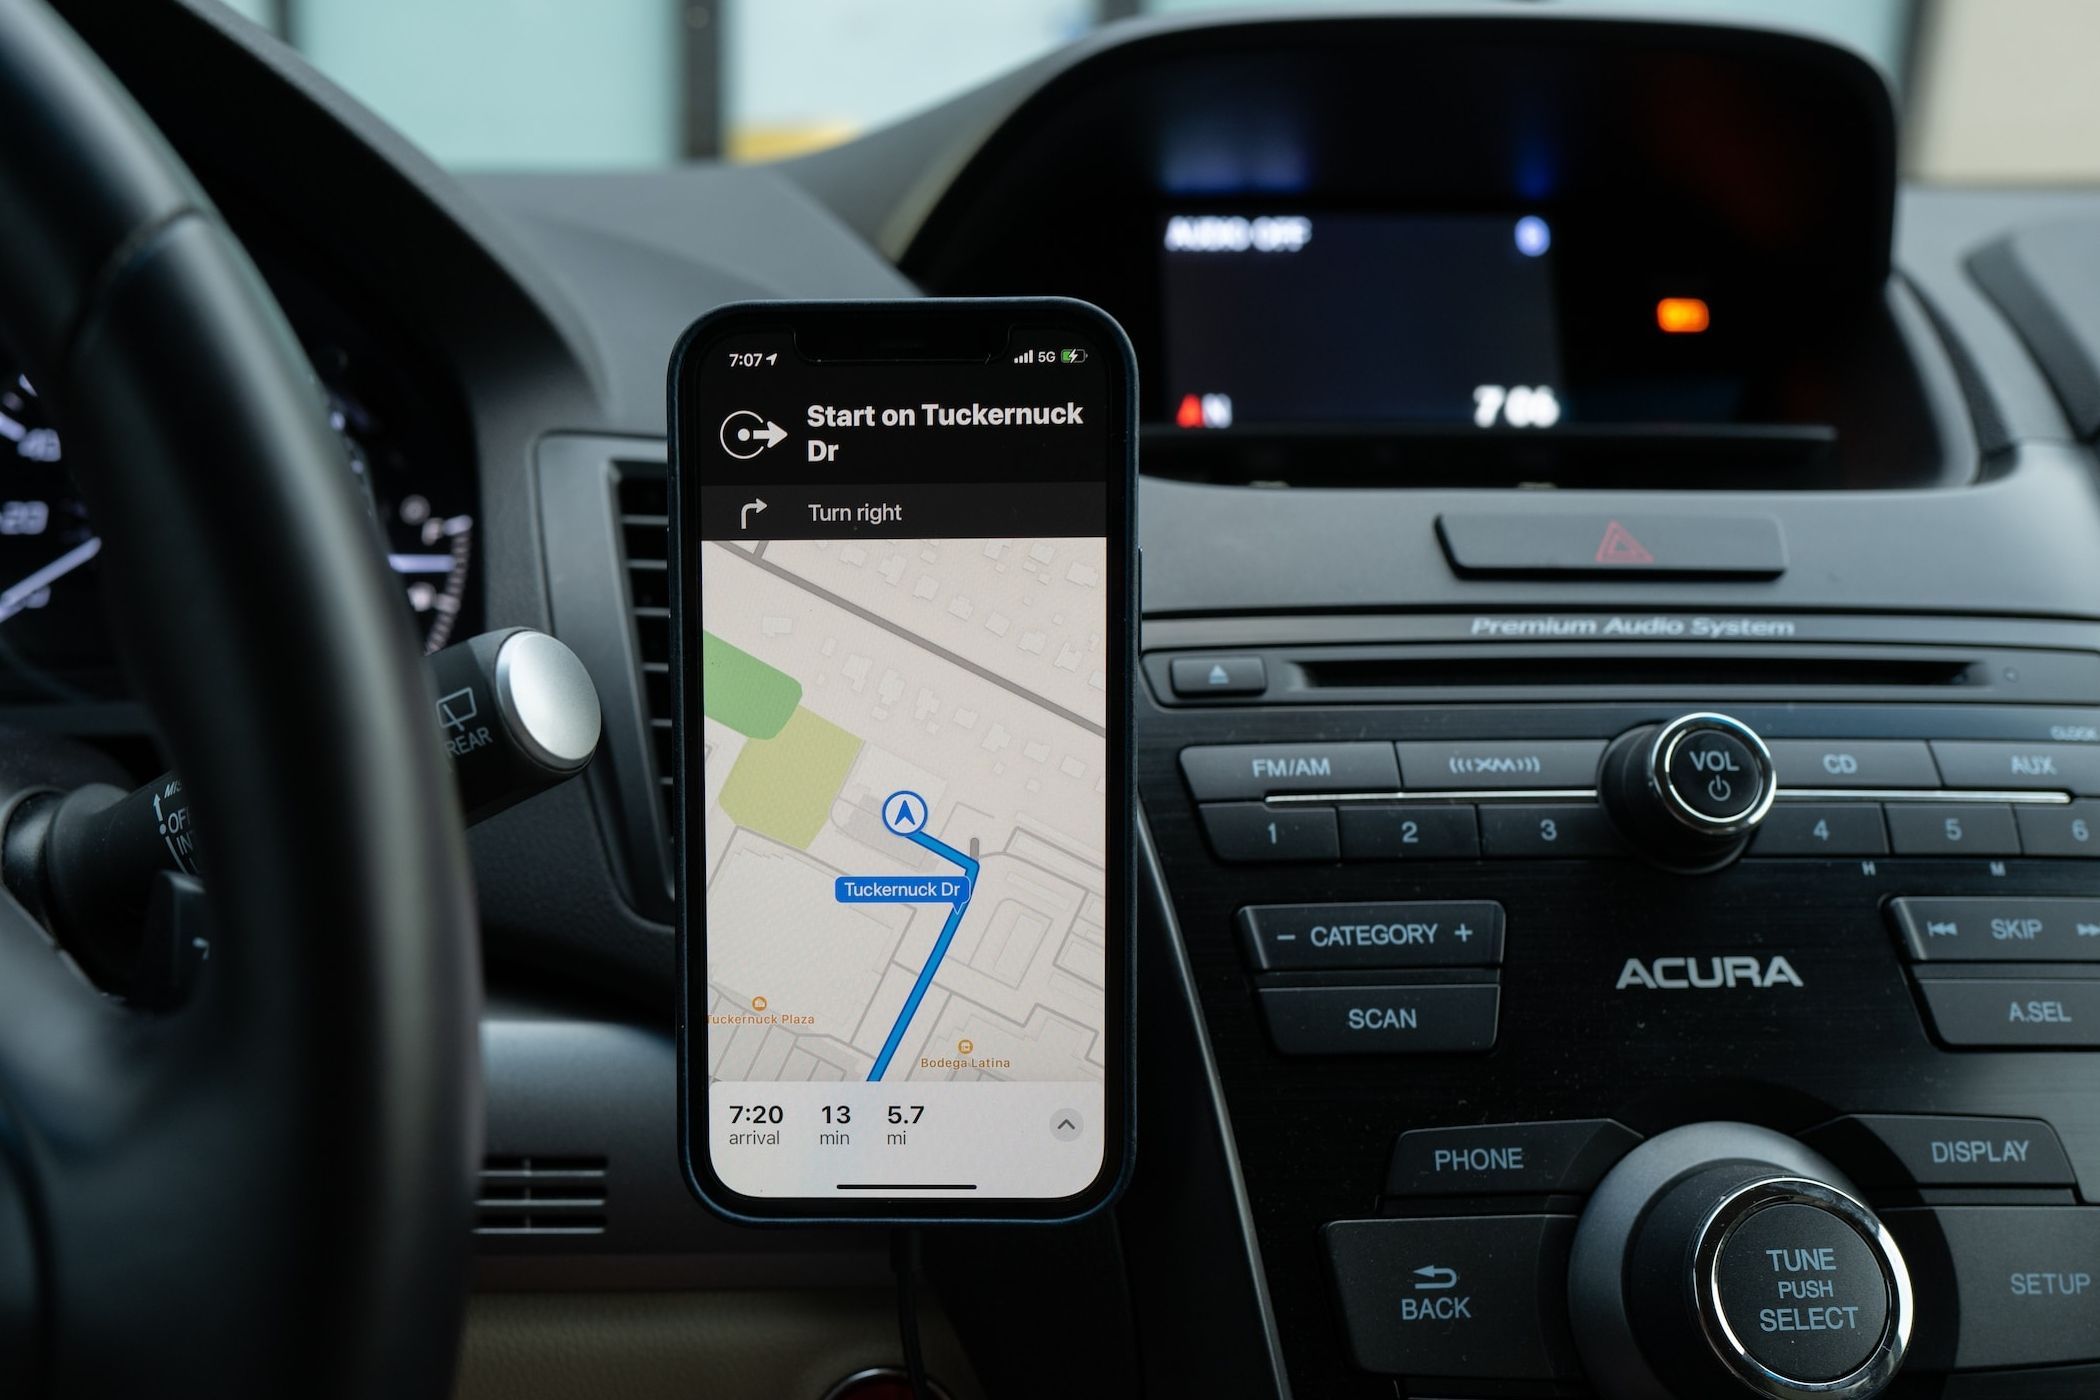 Apple Maps navigation on iPhone on a car dashboard